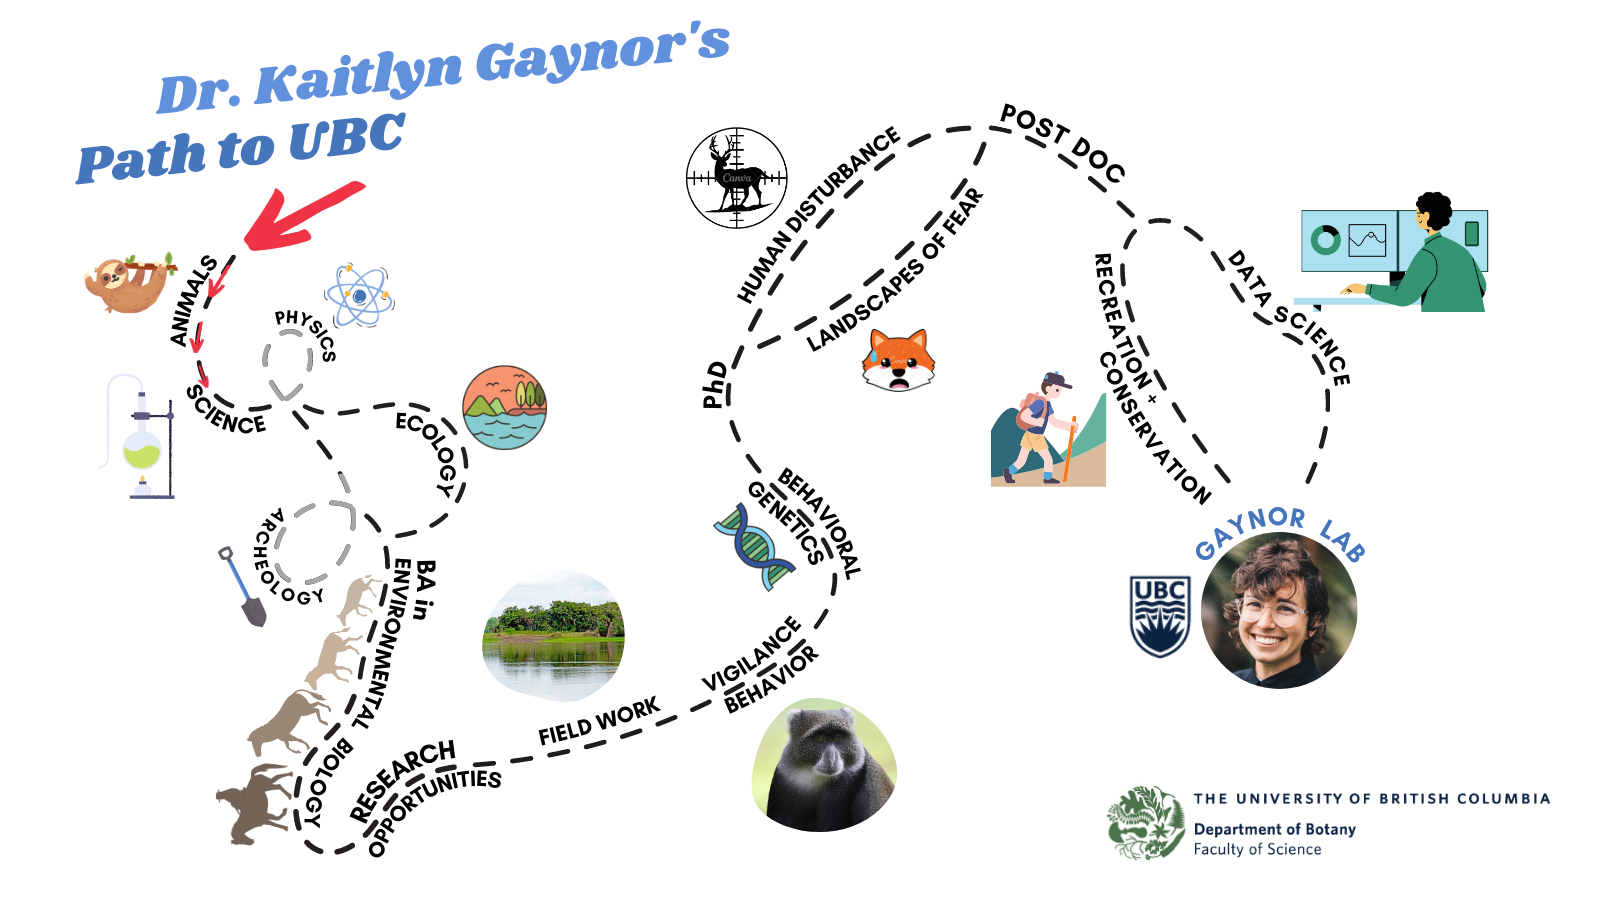 timeline of Gaynor's time as a scientist